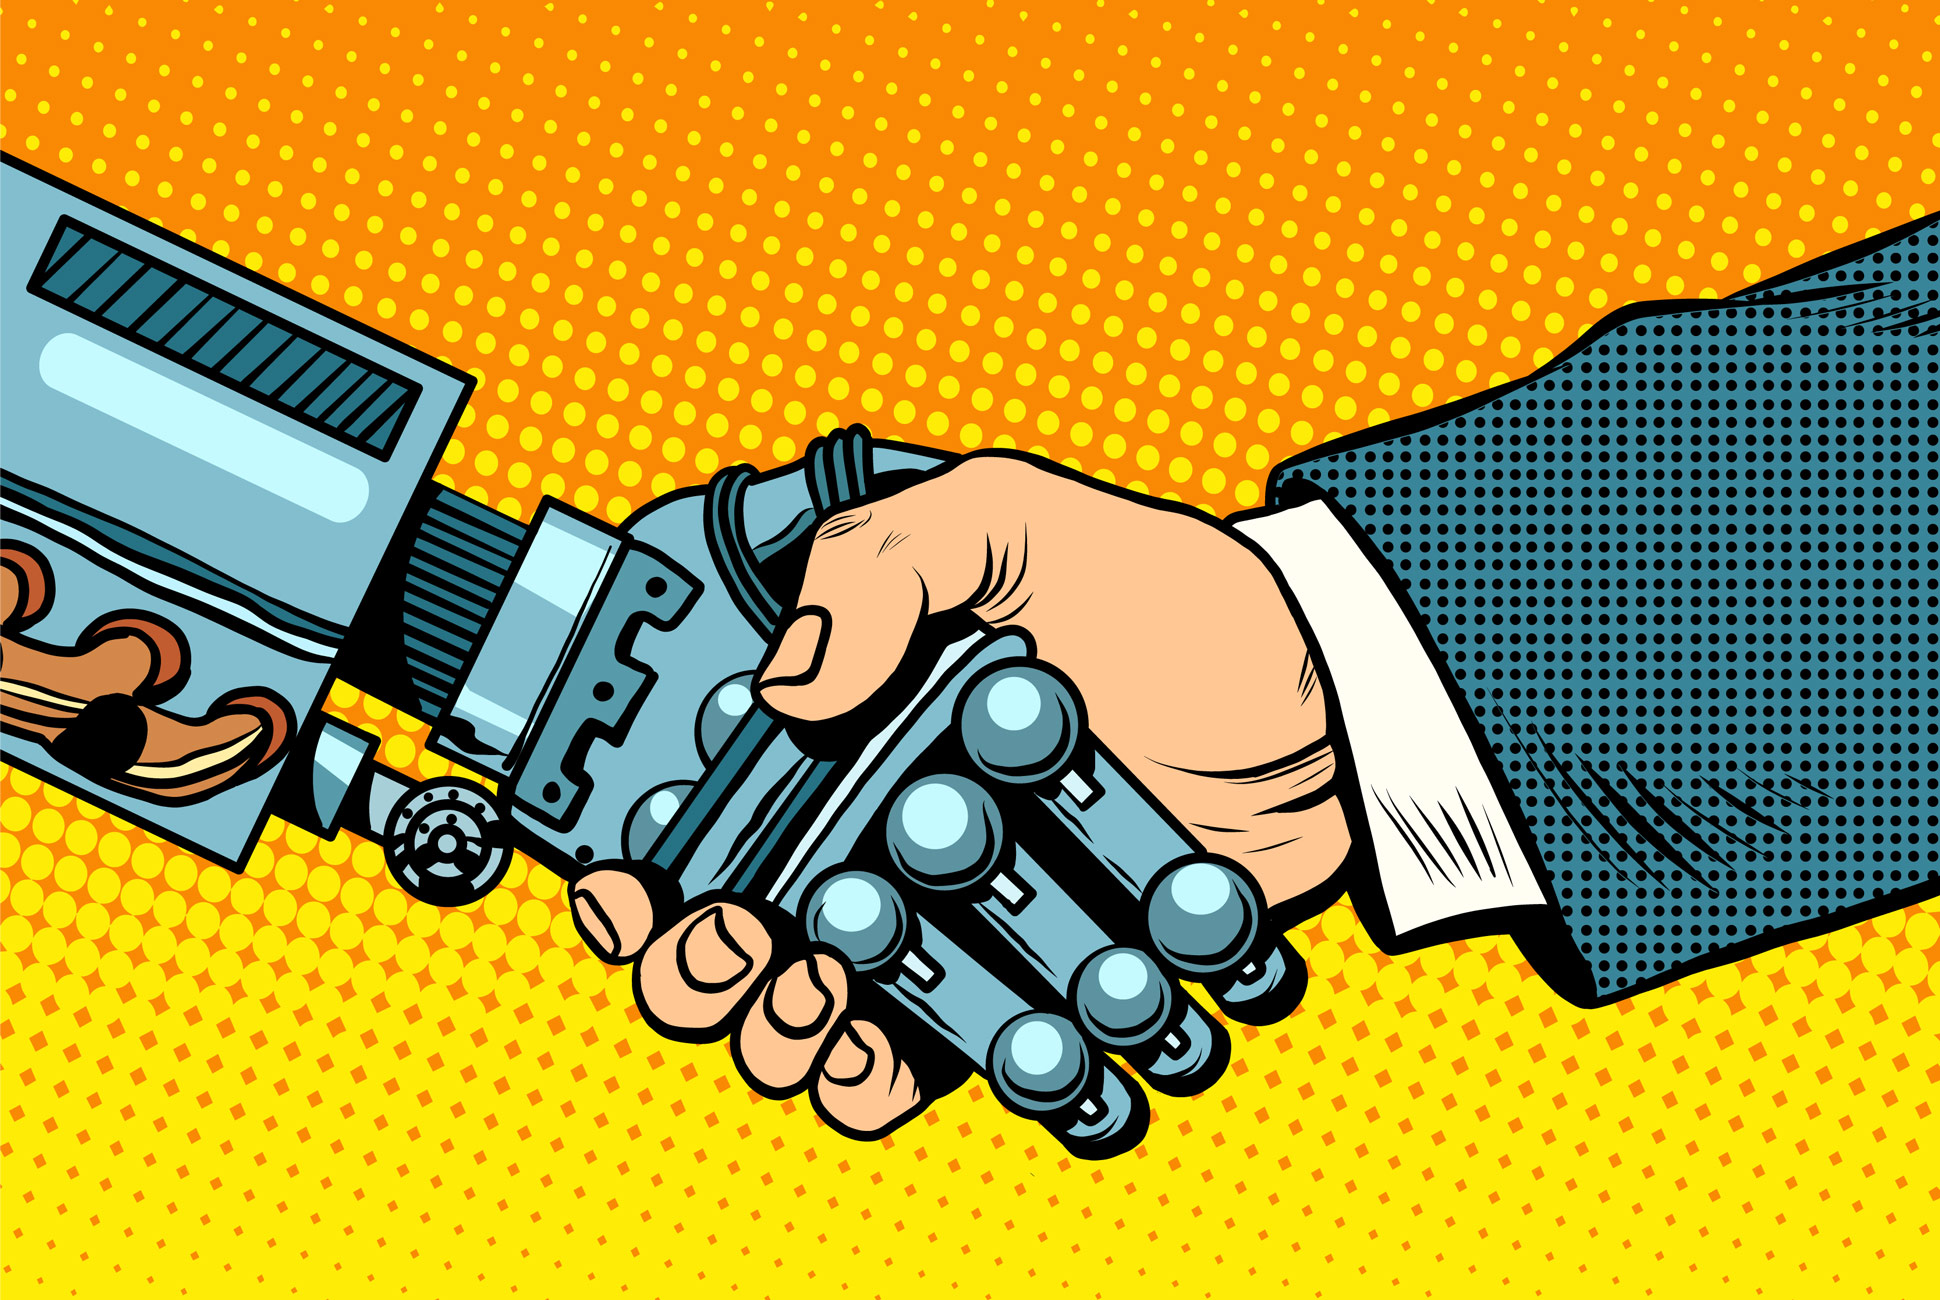 Will Robots Take Your Job? Don’t Trust Startups and Enterprises to Tell You